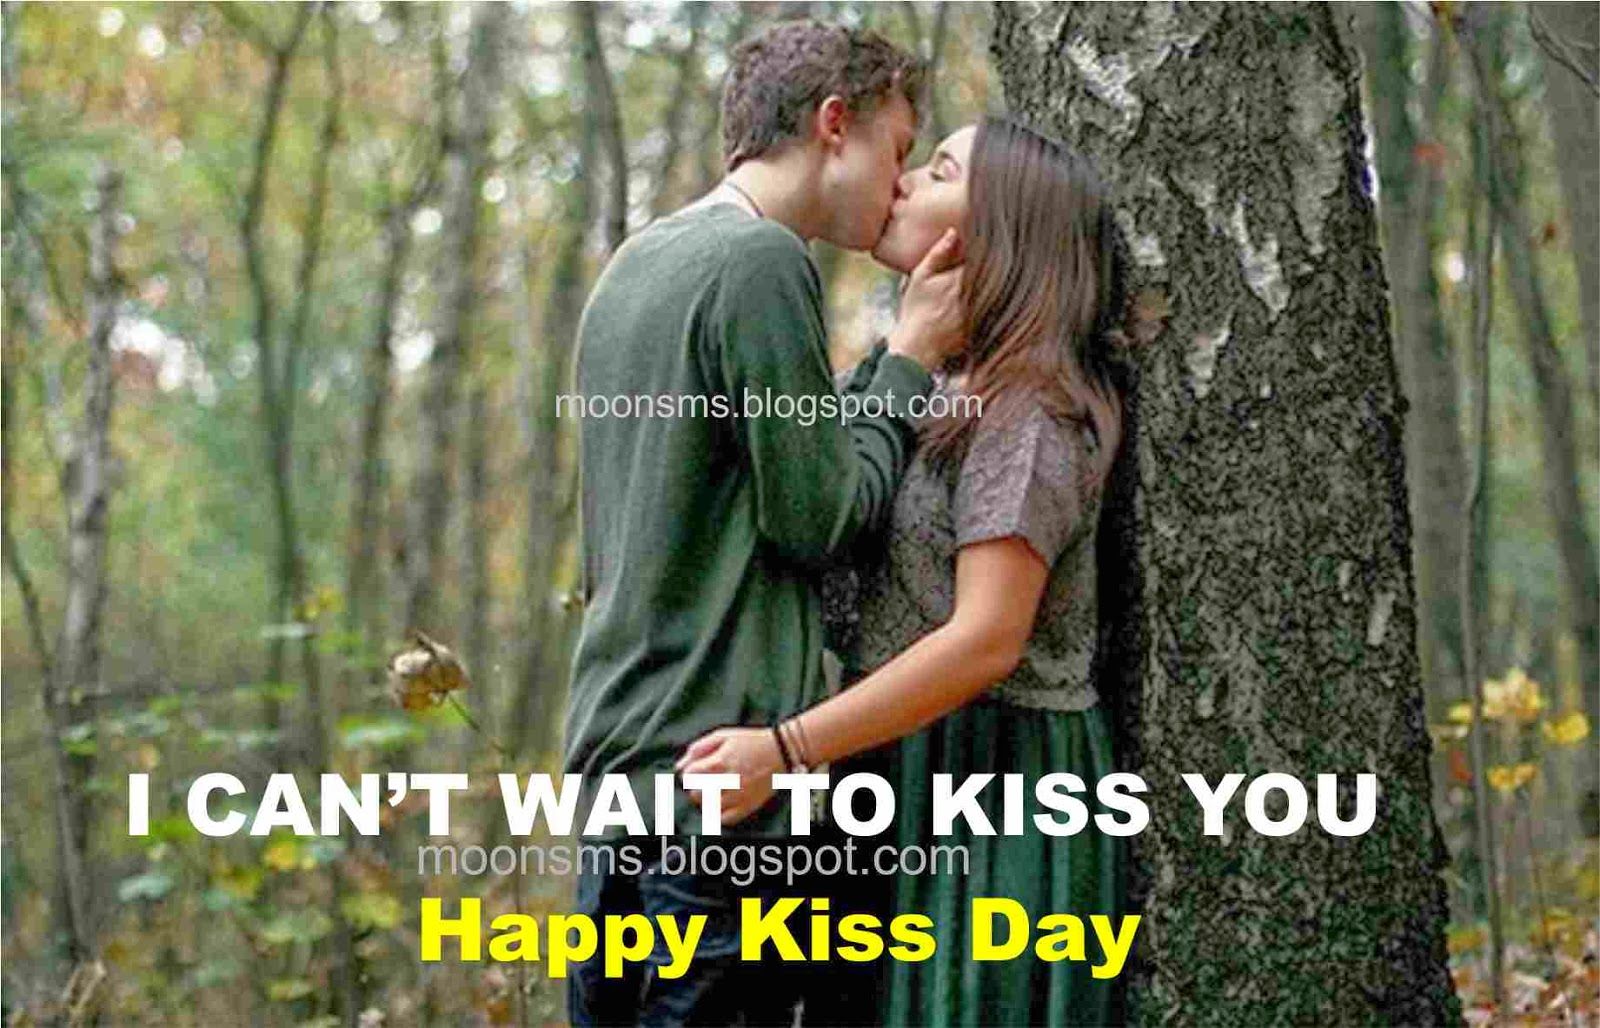 Happy kiss day Kiss sms text message wishes quotes jokes Greetings